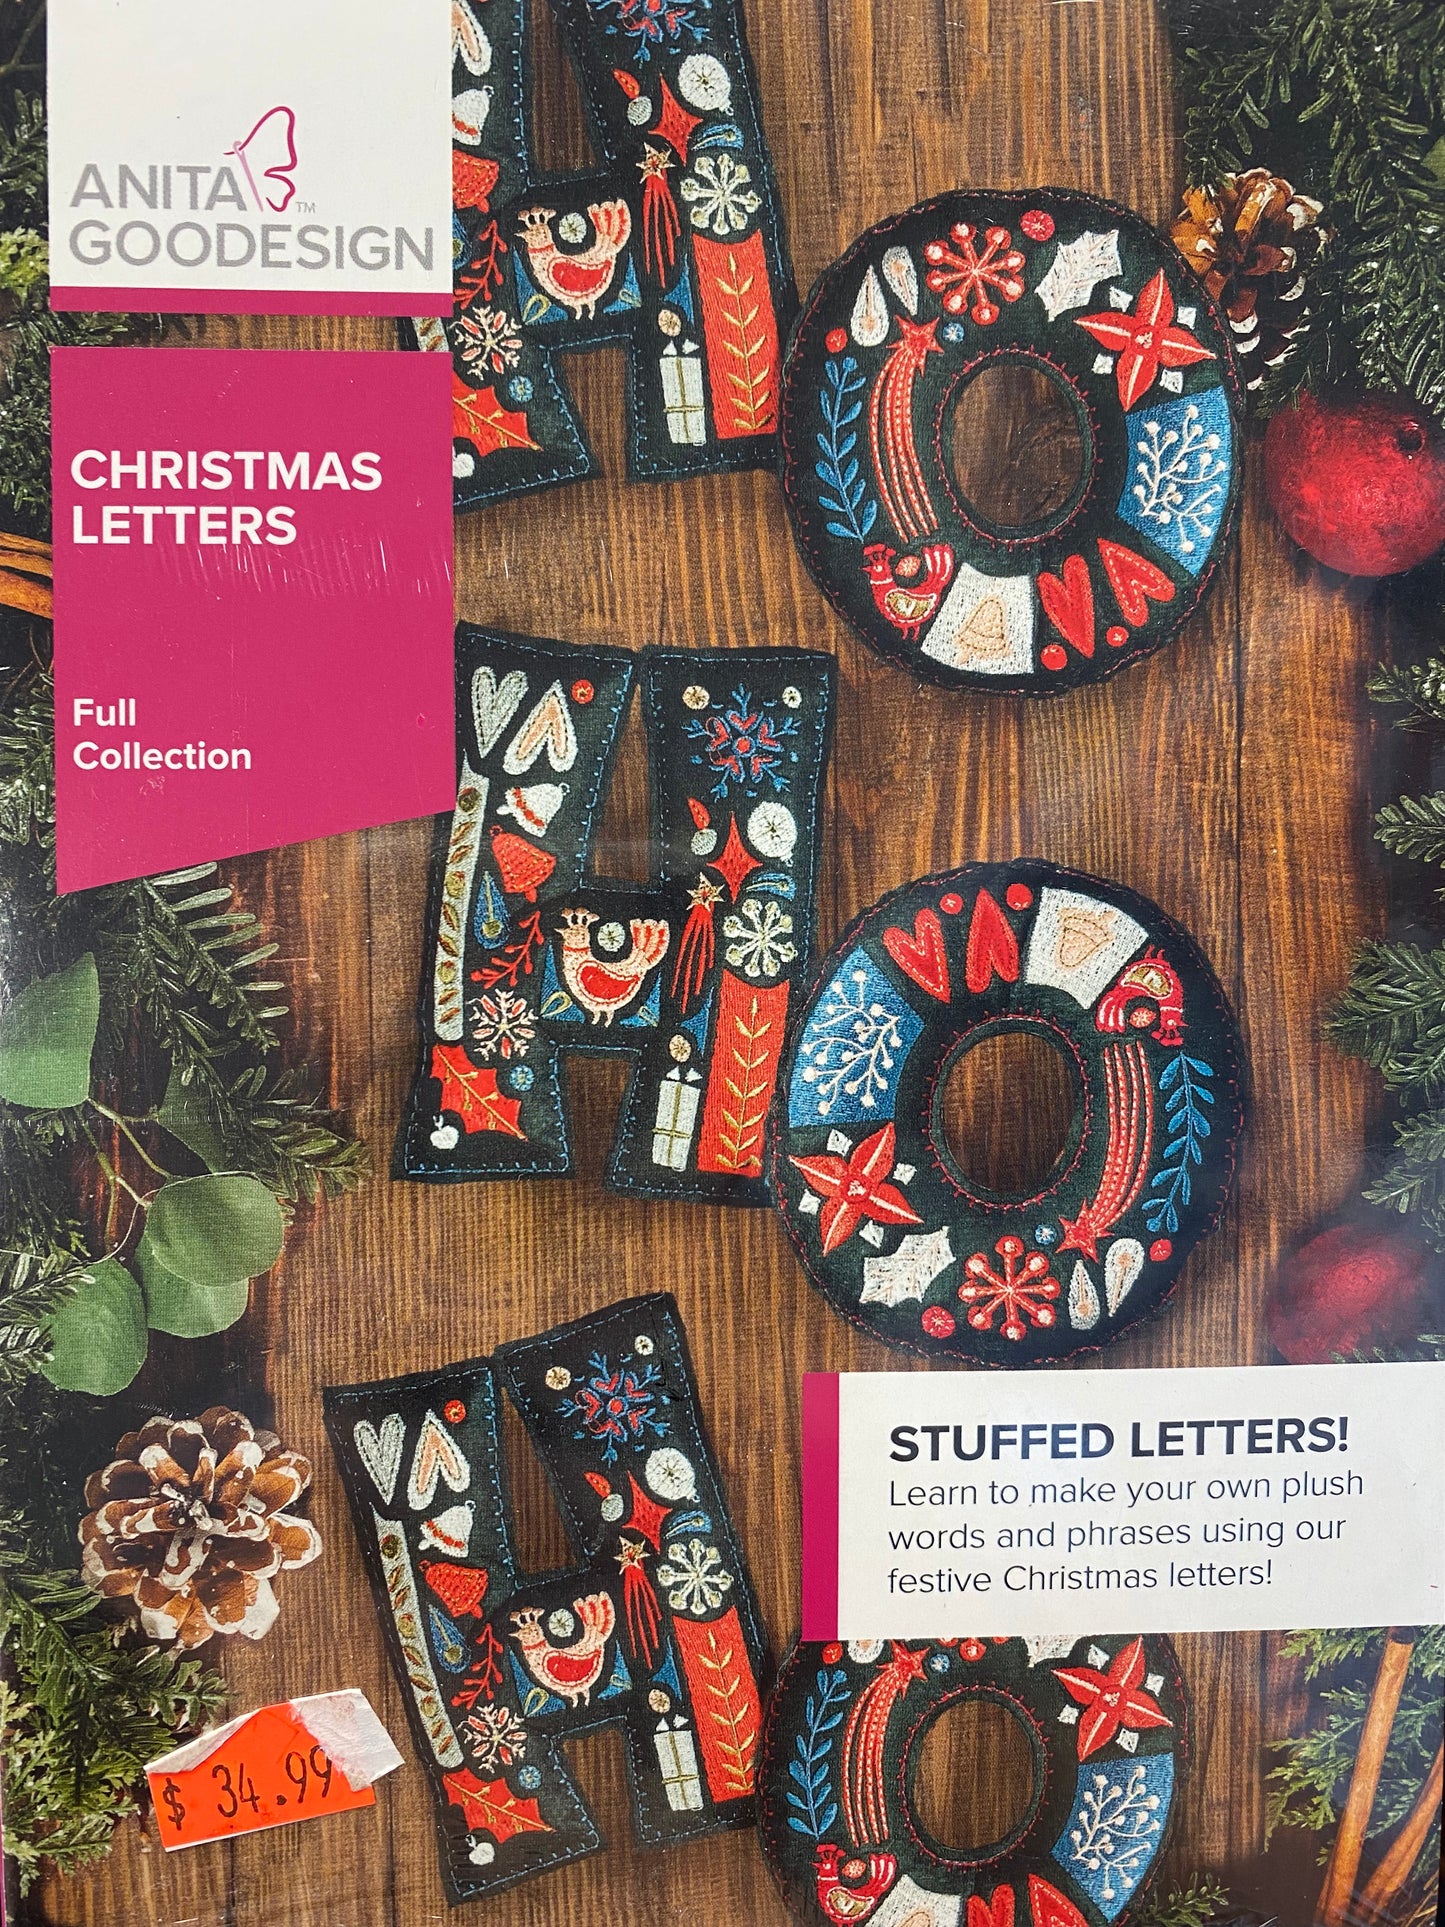 Christmas Letters by Anita Goodesign